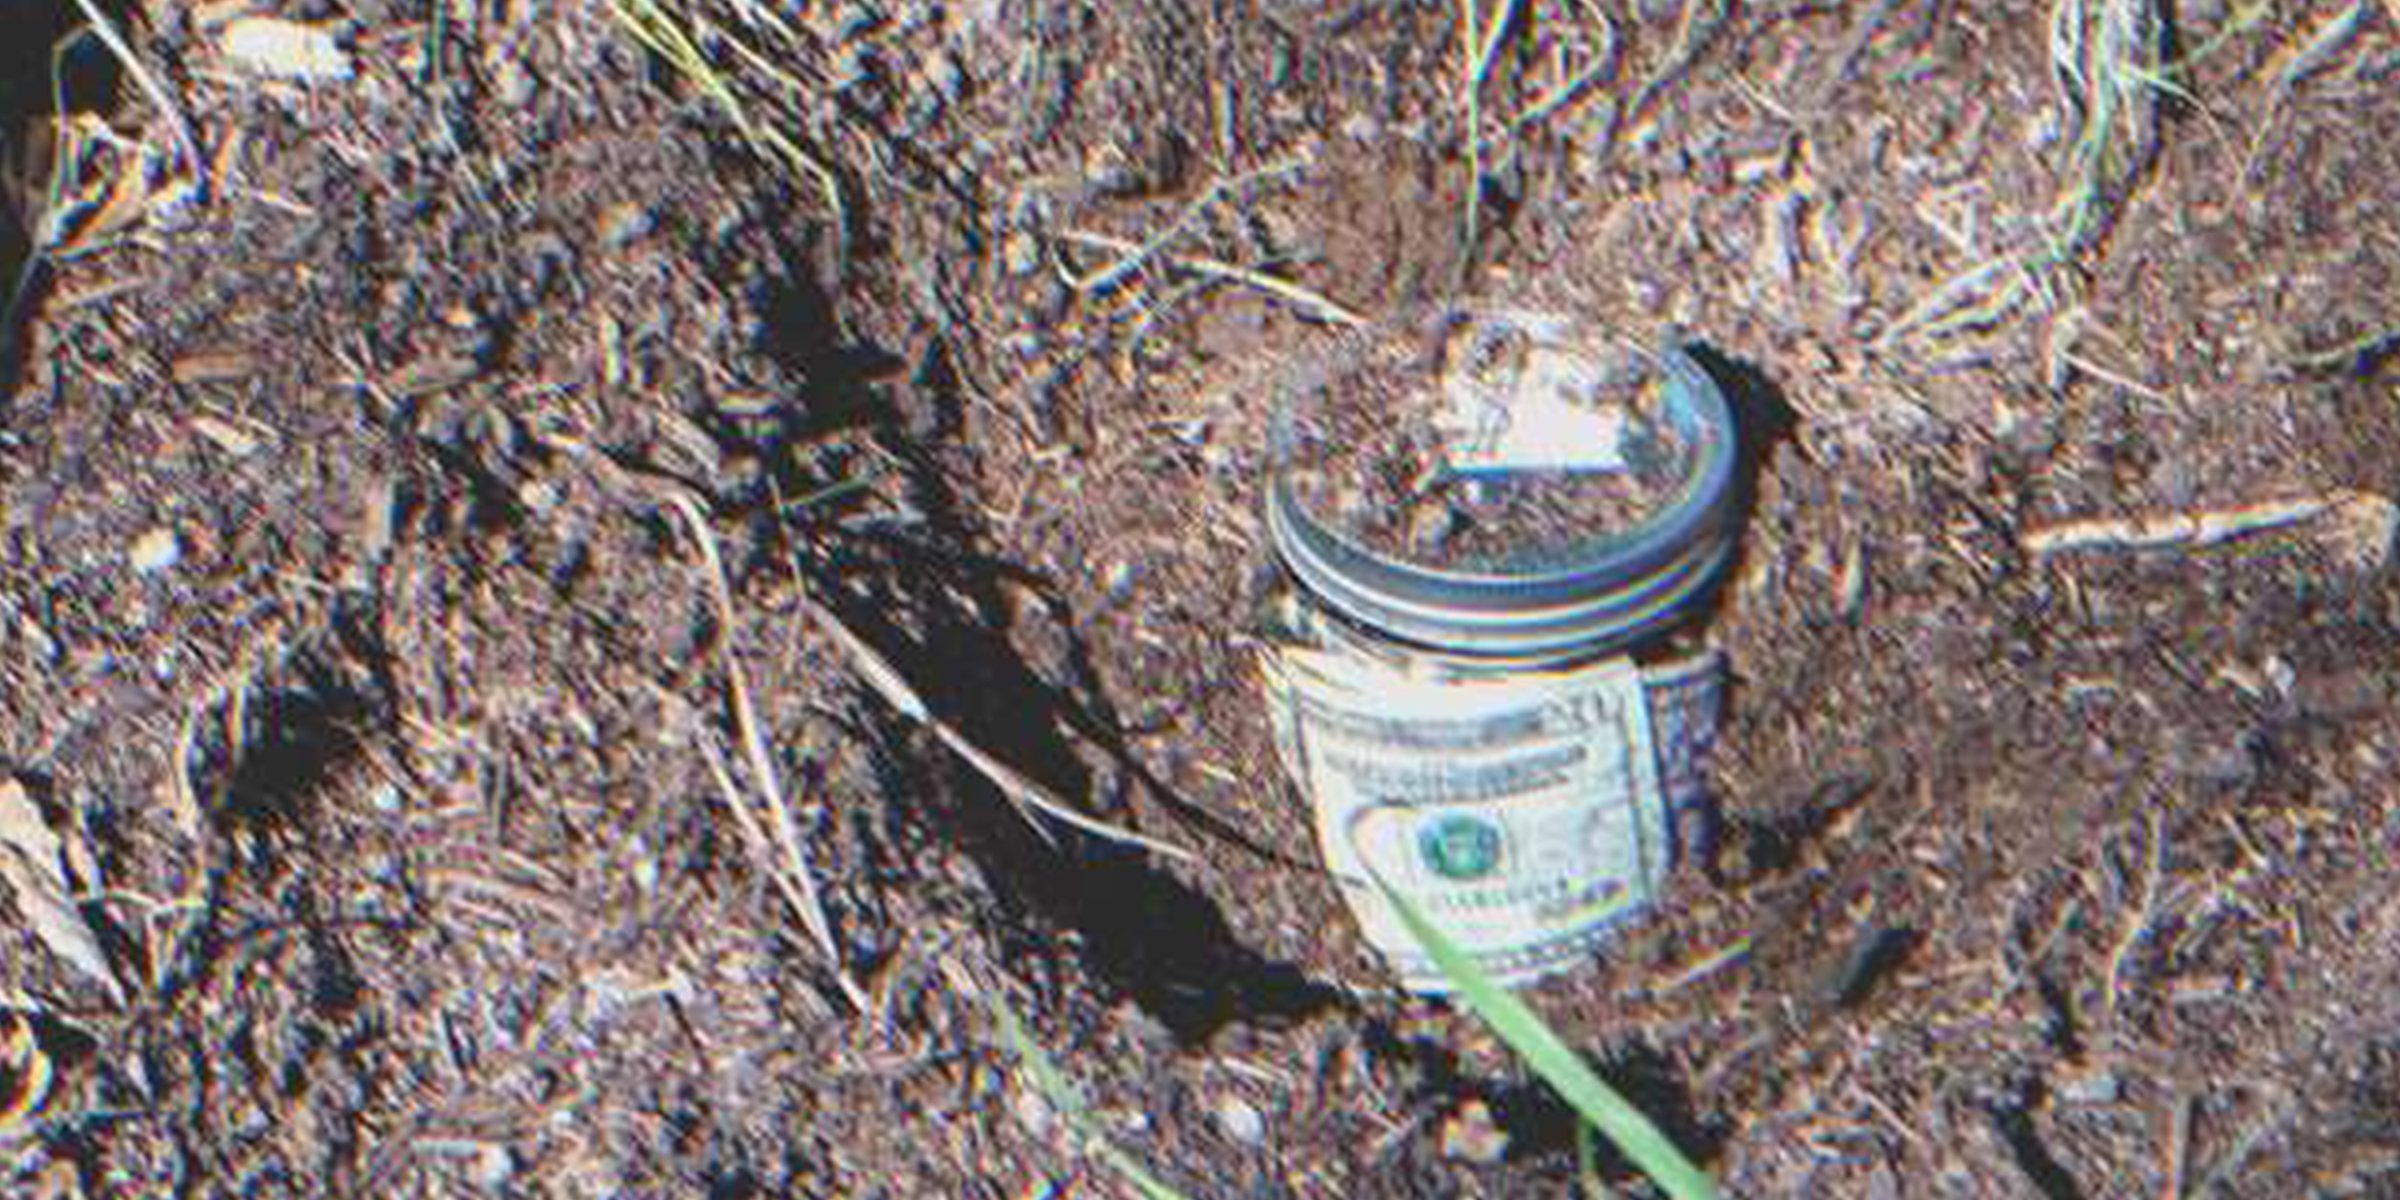 Money stashed in a glass jar buried on the ground | Source: Shutterstock